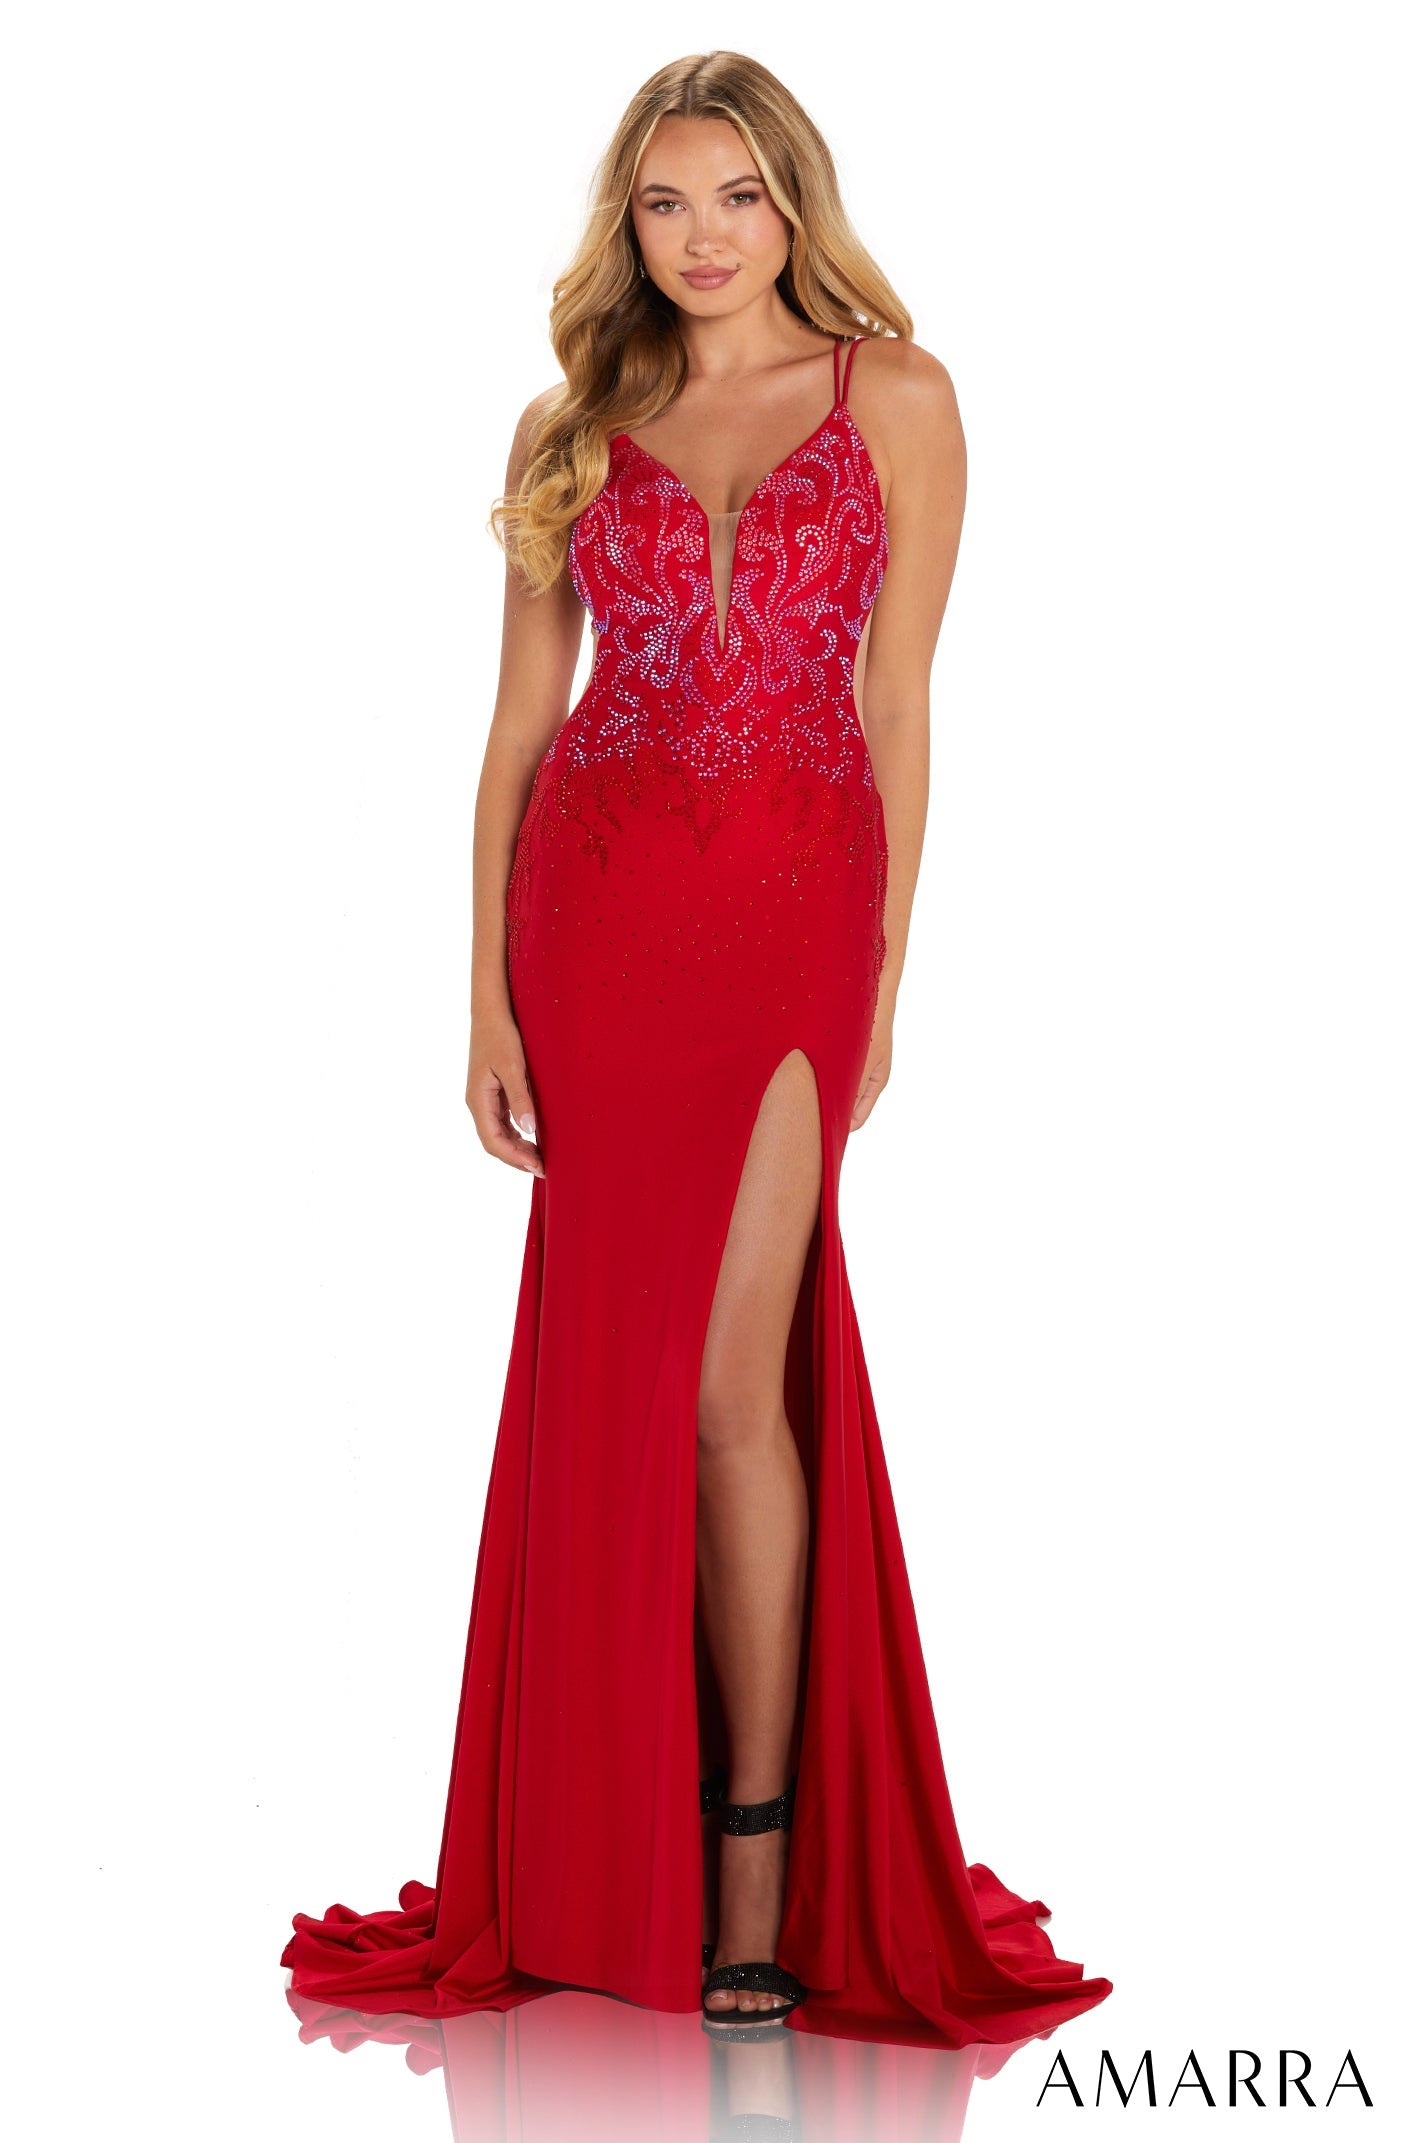 Amarra 20019 Long Fitted Backless Prom Dress Embellished V Neck Slit corset.  When it comes to prom night, it’s all in the details. Style 20019 features a plunging neckline embellished with beautiful accents. A slit skirt and lace up back add a spicy touch to an elegant gown.